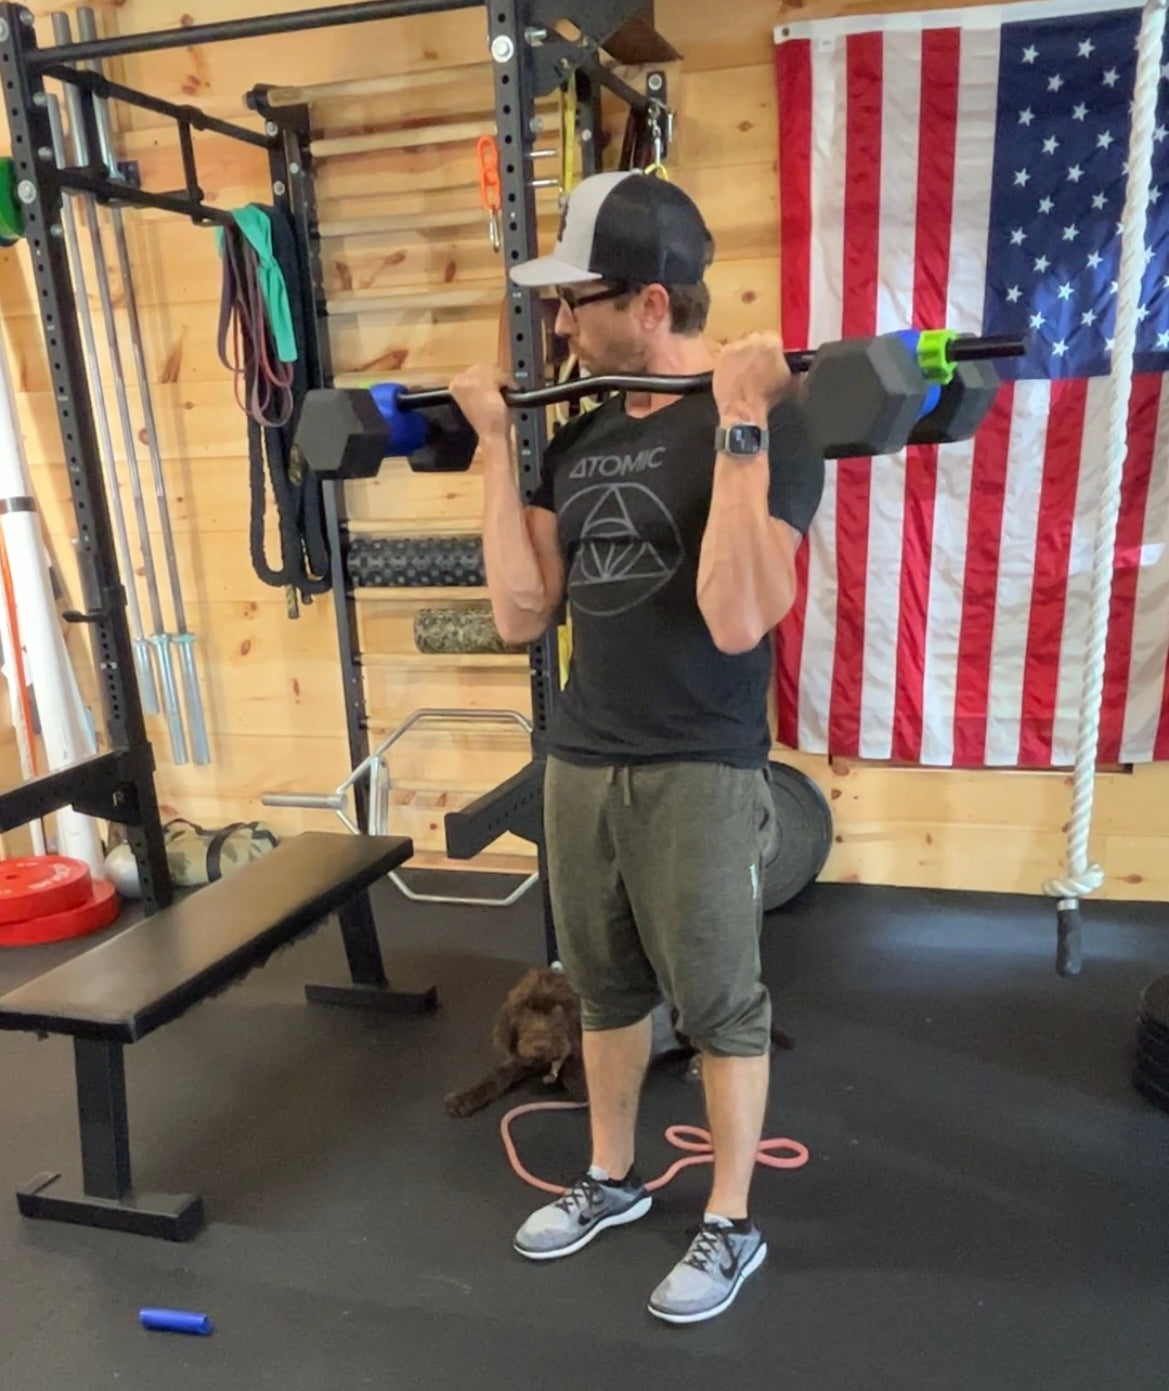 Dualbell Pair connected to an ez curl bar  for biceps curls